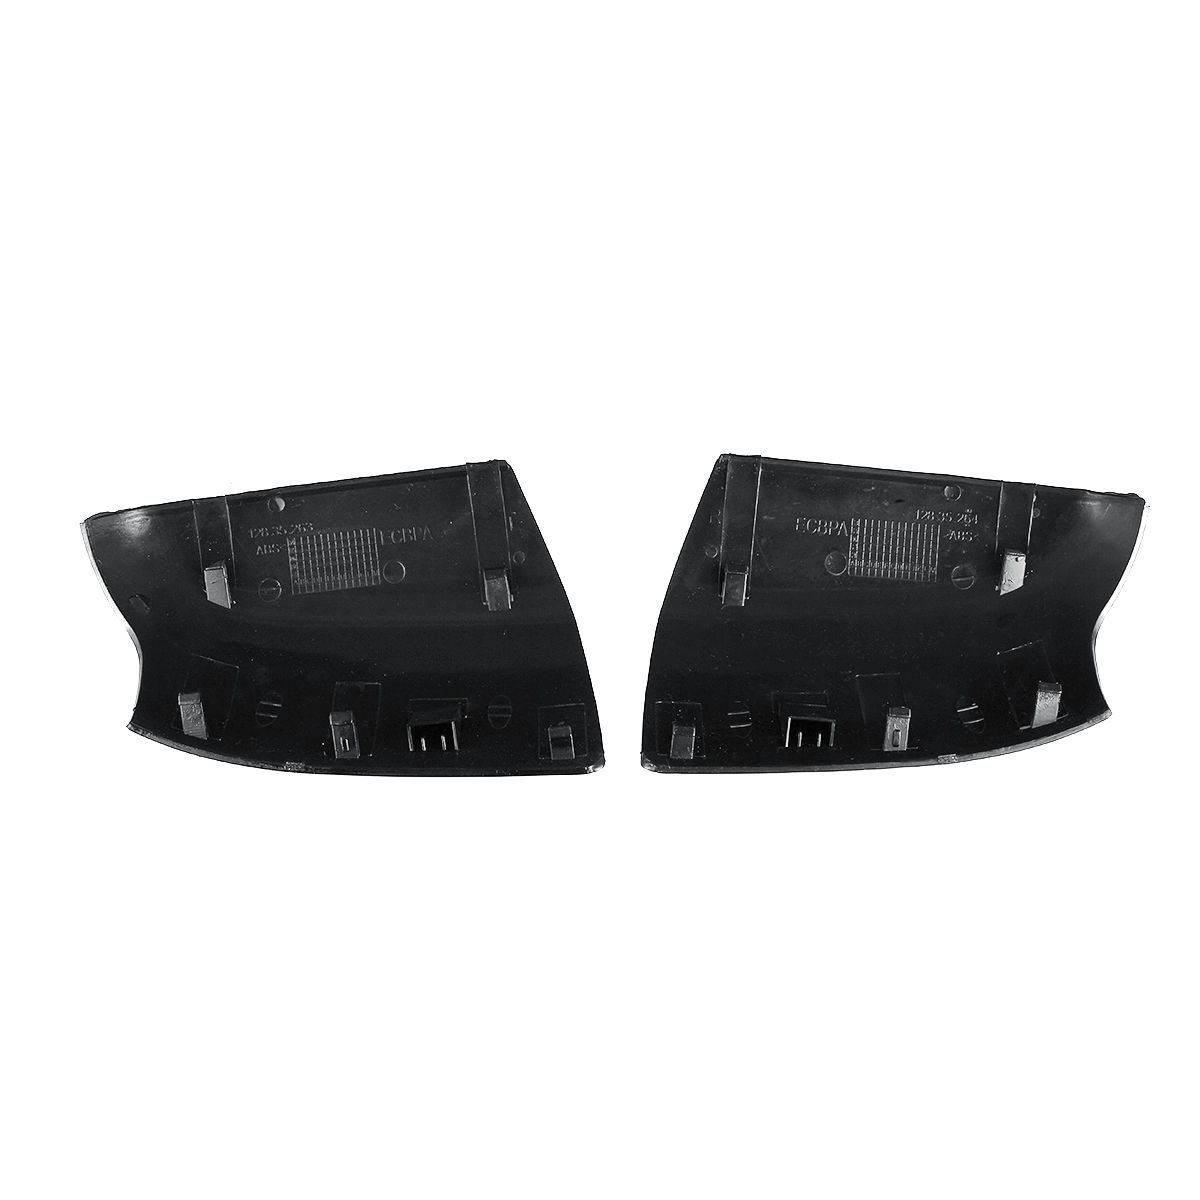 Car-Black-Side-Door-Wing-Rearview-Mirror-Cover-Cap-Casing-Trim-Right-Driver-For-Ford-Focus-1685813